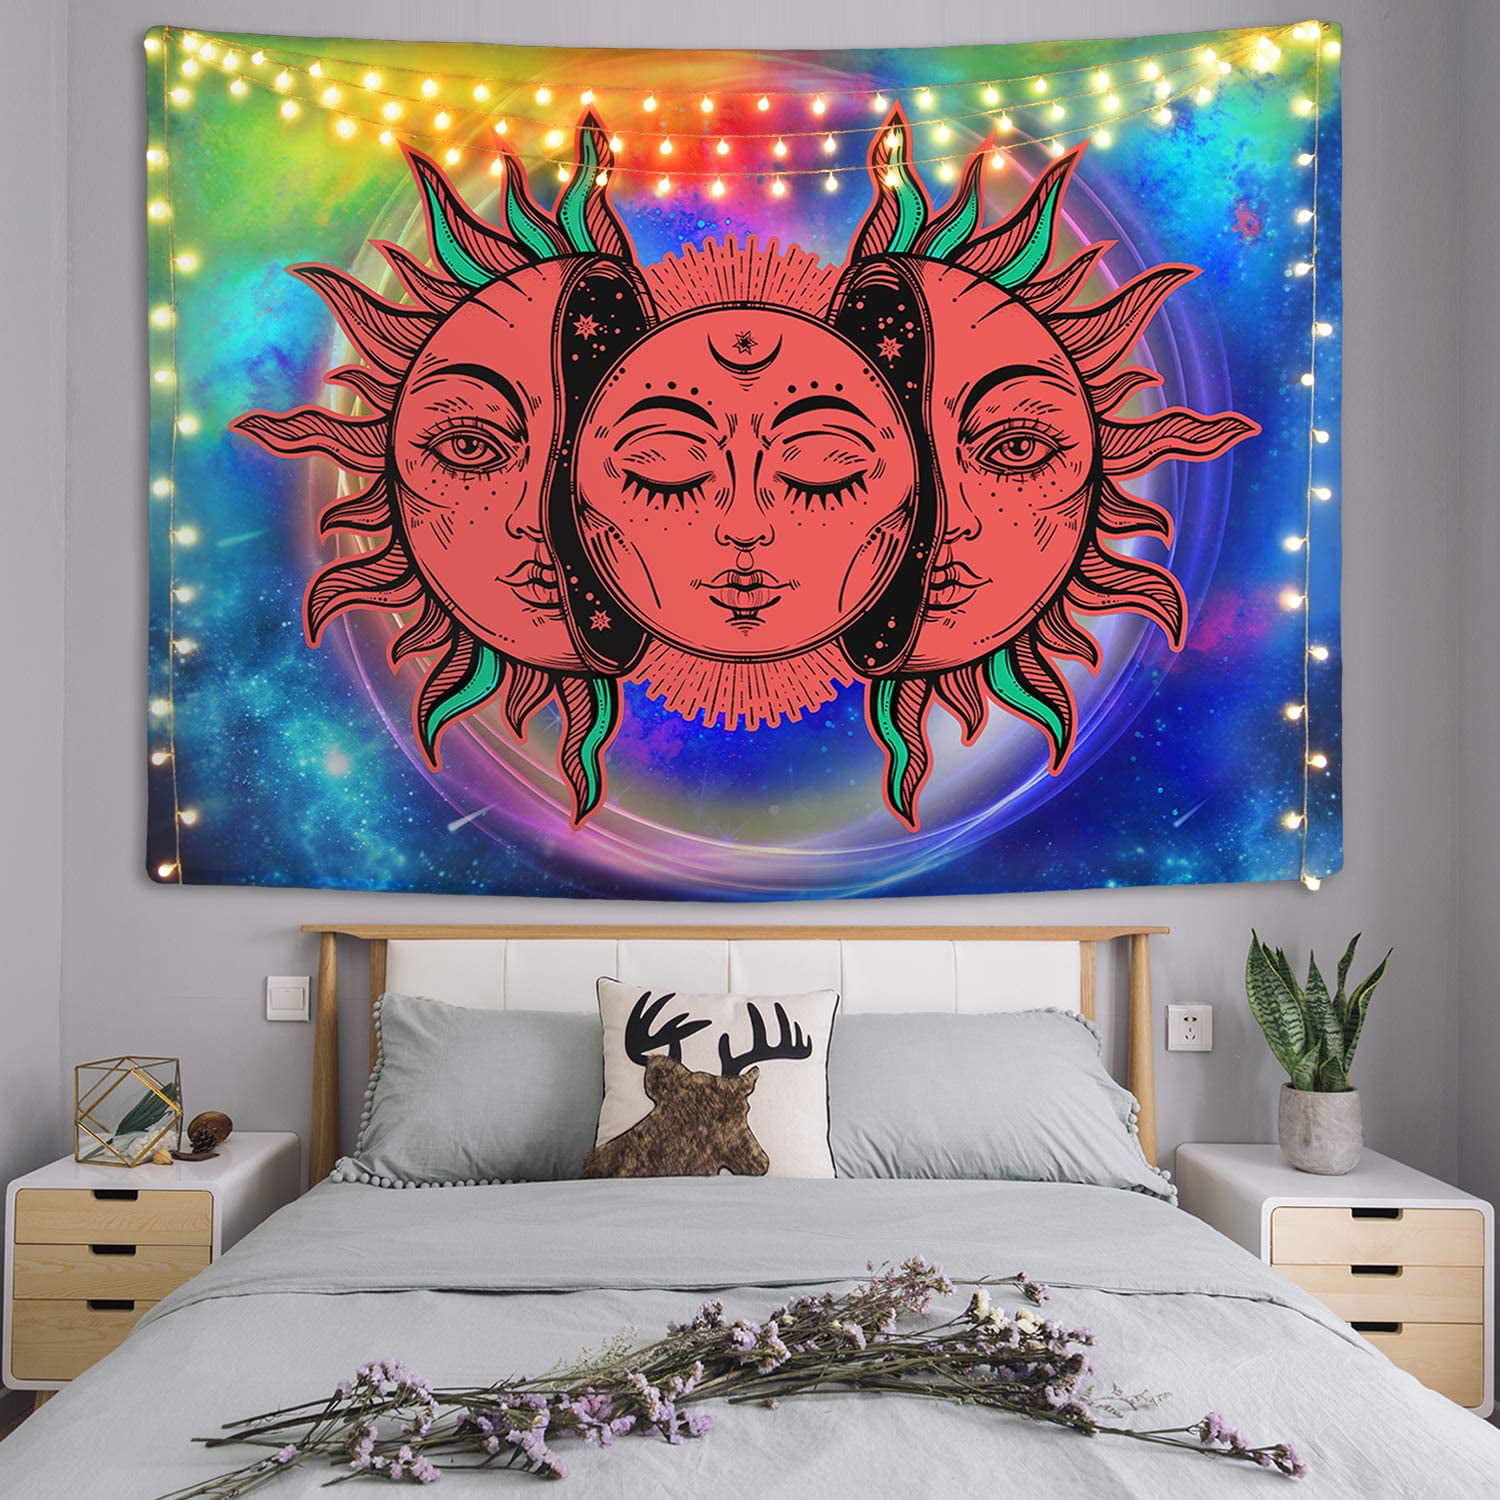 Celestial Boobs Boho Style Trippy Tapestry Aesthetic Wall Decor Wall Hanging Psychedelic Art